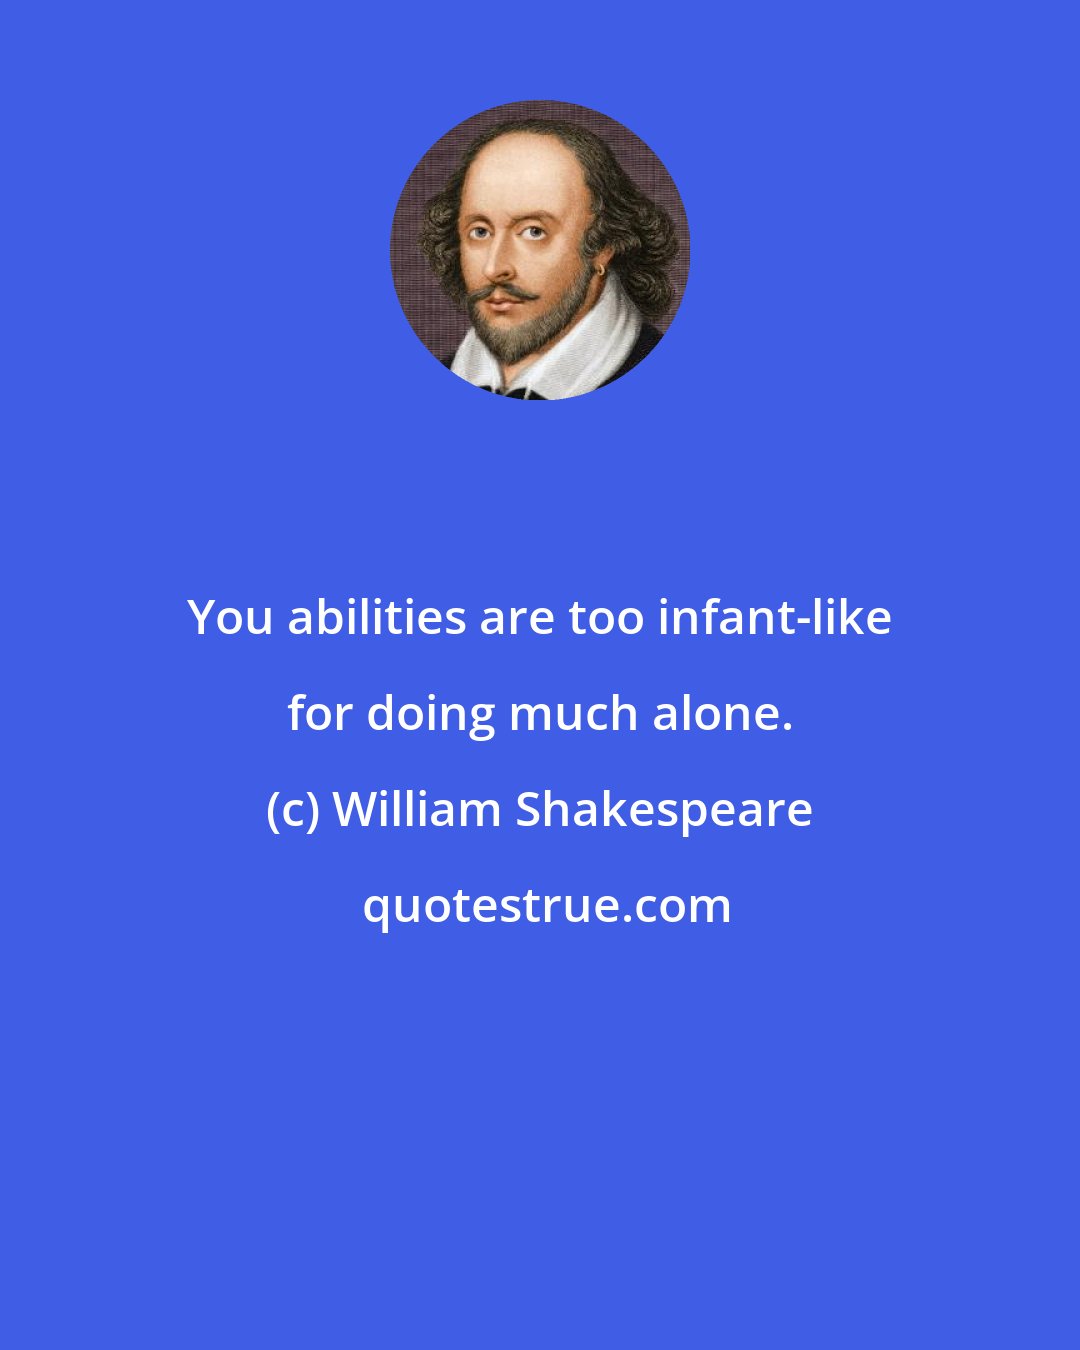 William Shakespeare: You abilities are too infant-like for doing much alone.